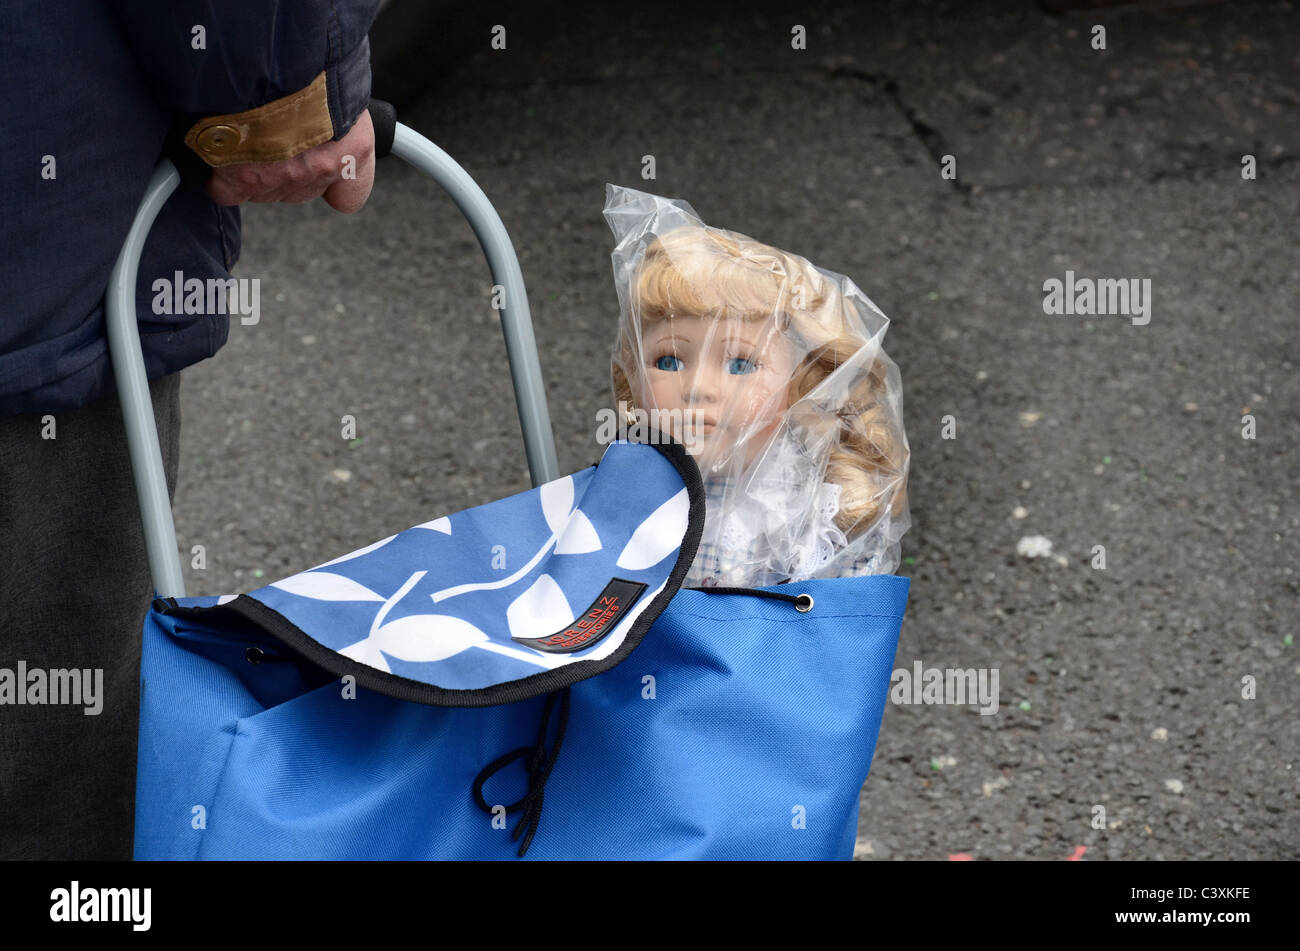 A child's doll in a plastic bag sticking out of a shopping trolley. Stock Photo